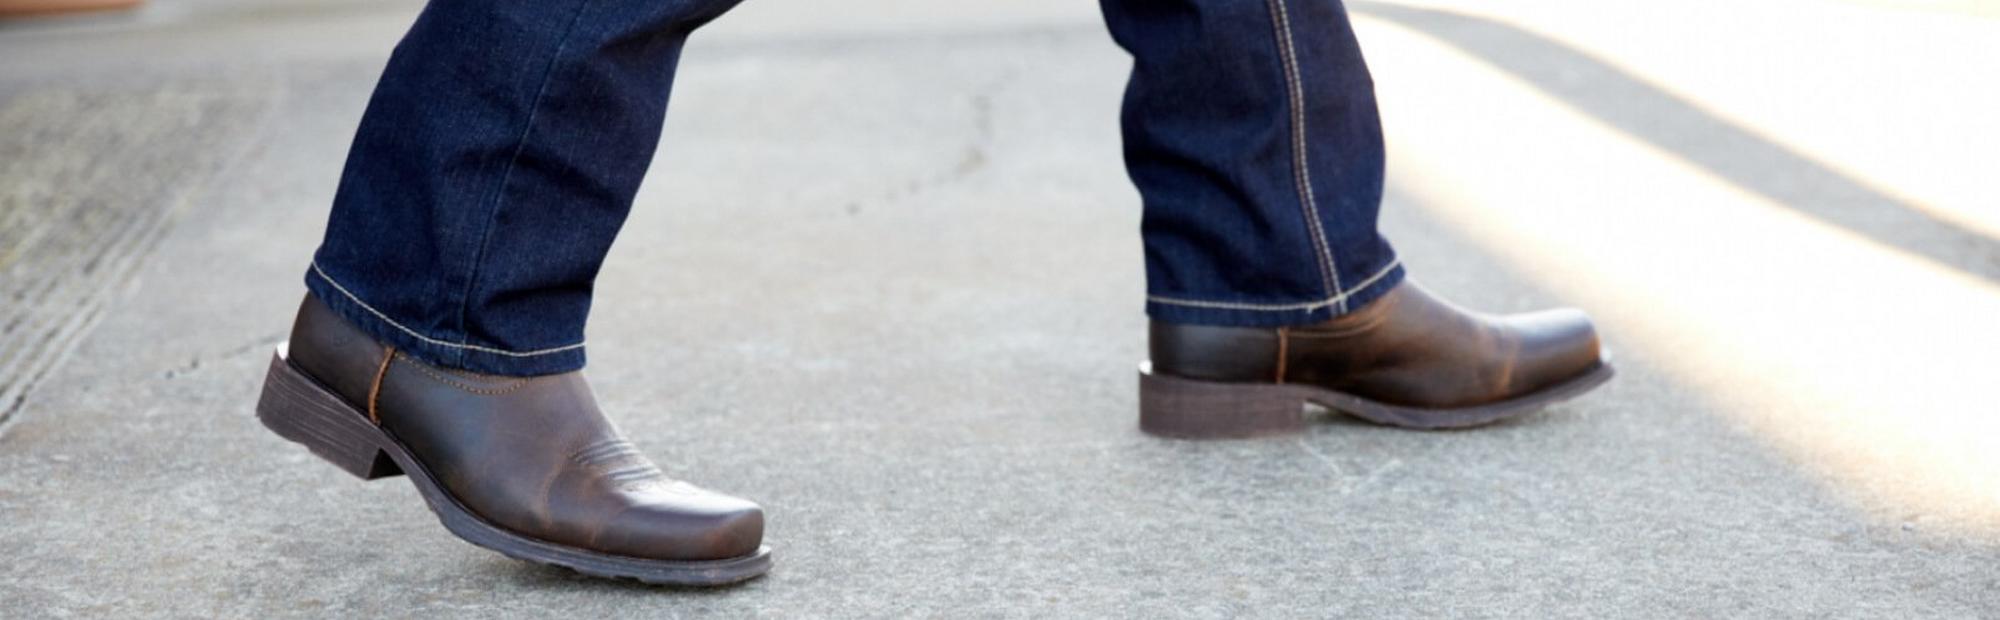 Complete Guide and Quick Tips on Wearing Boots with Jeans